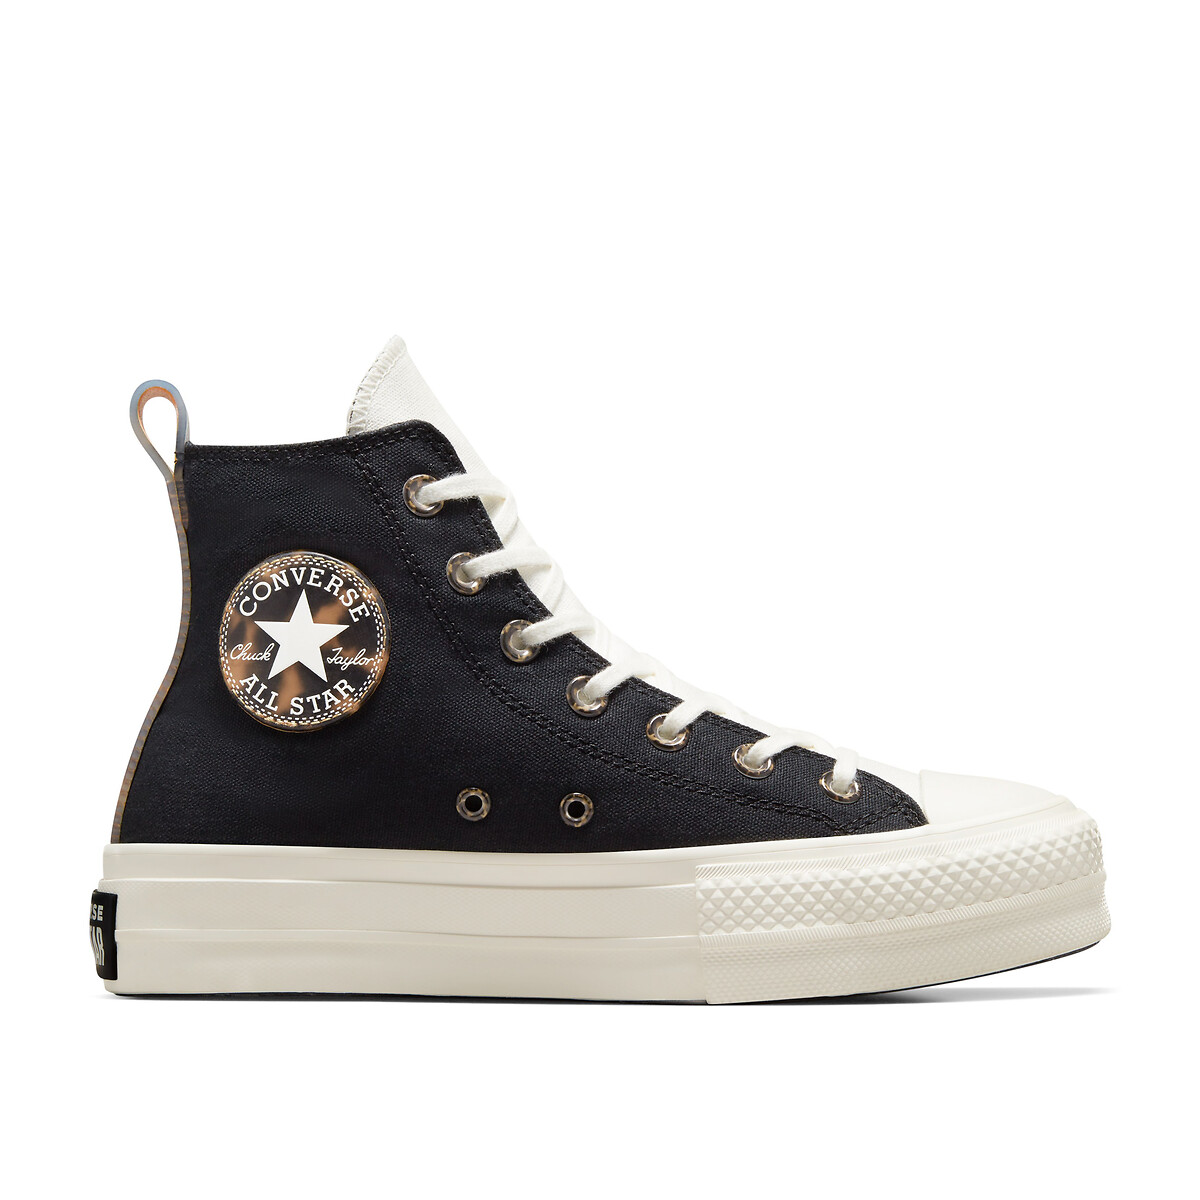 Image of All Star Lift Hi Tortoise Canvas High Top Trainers